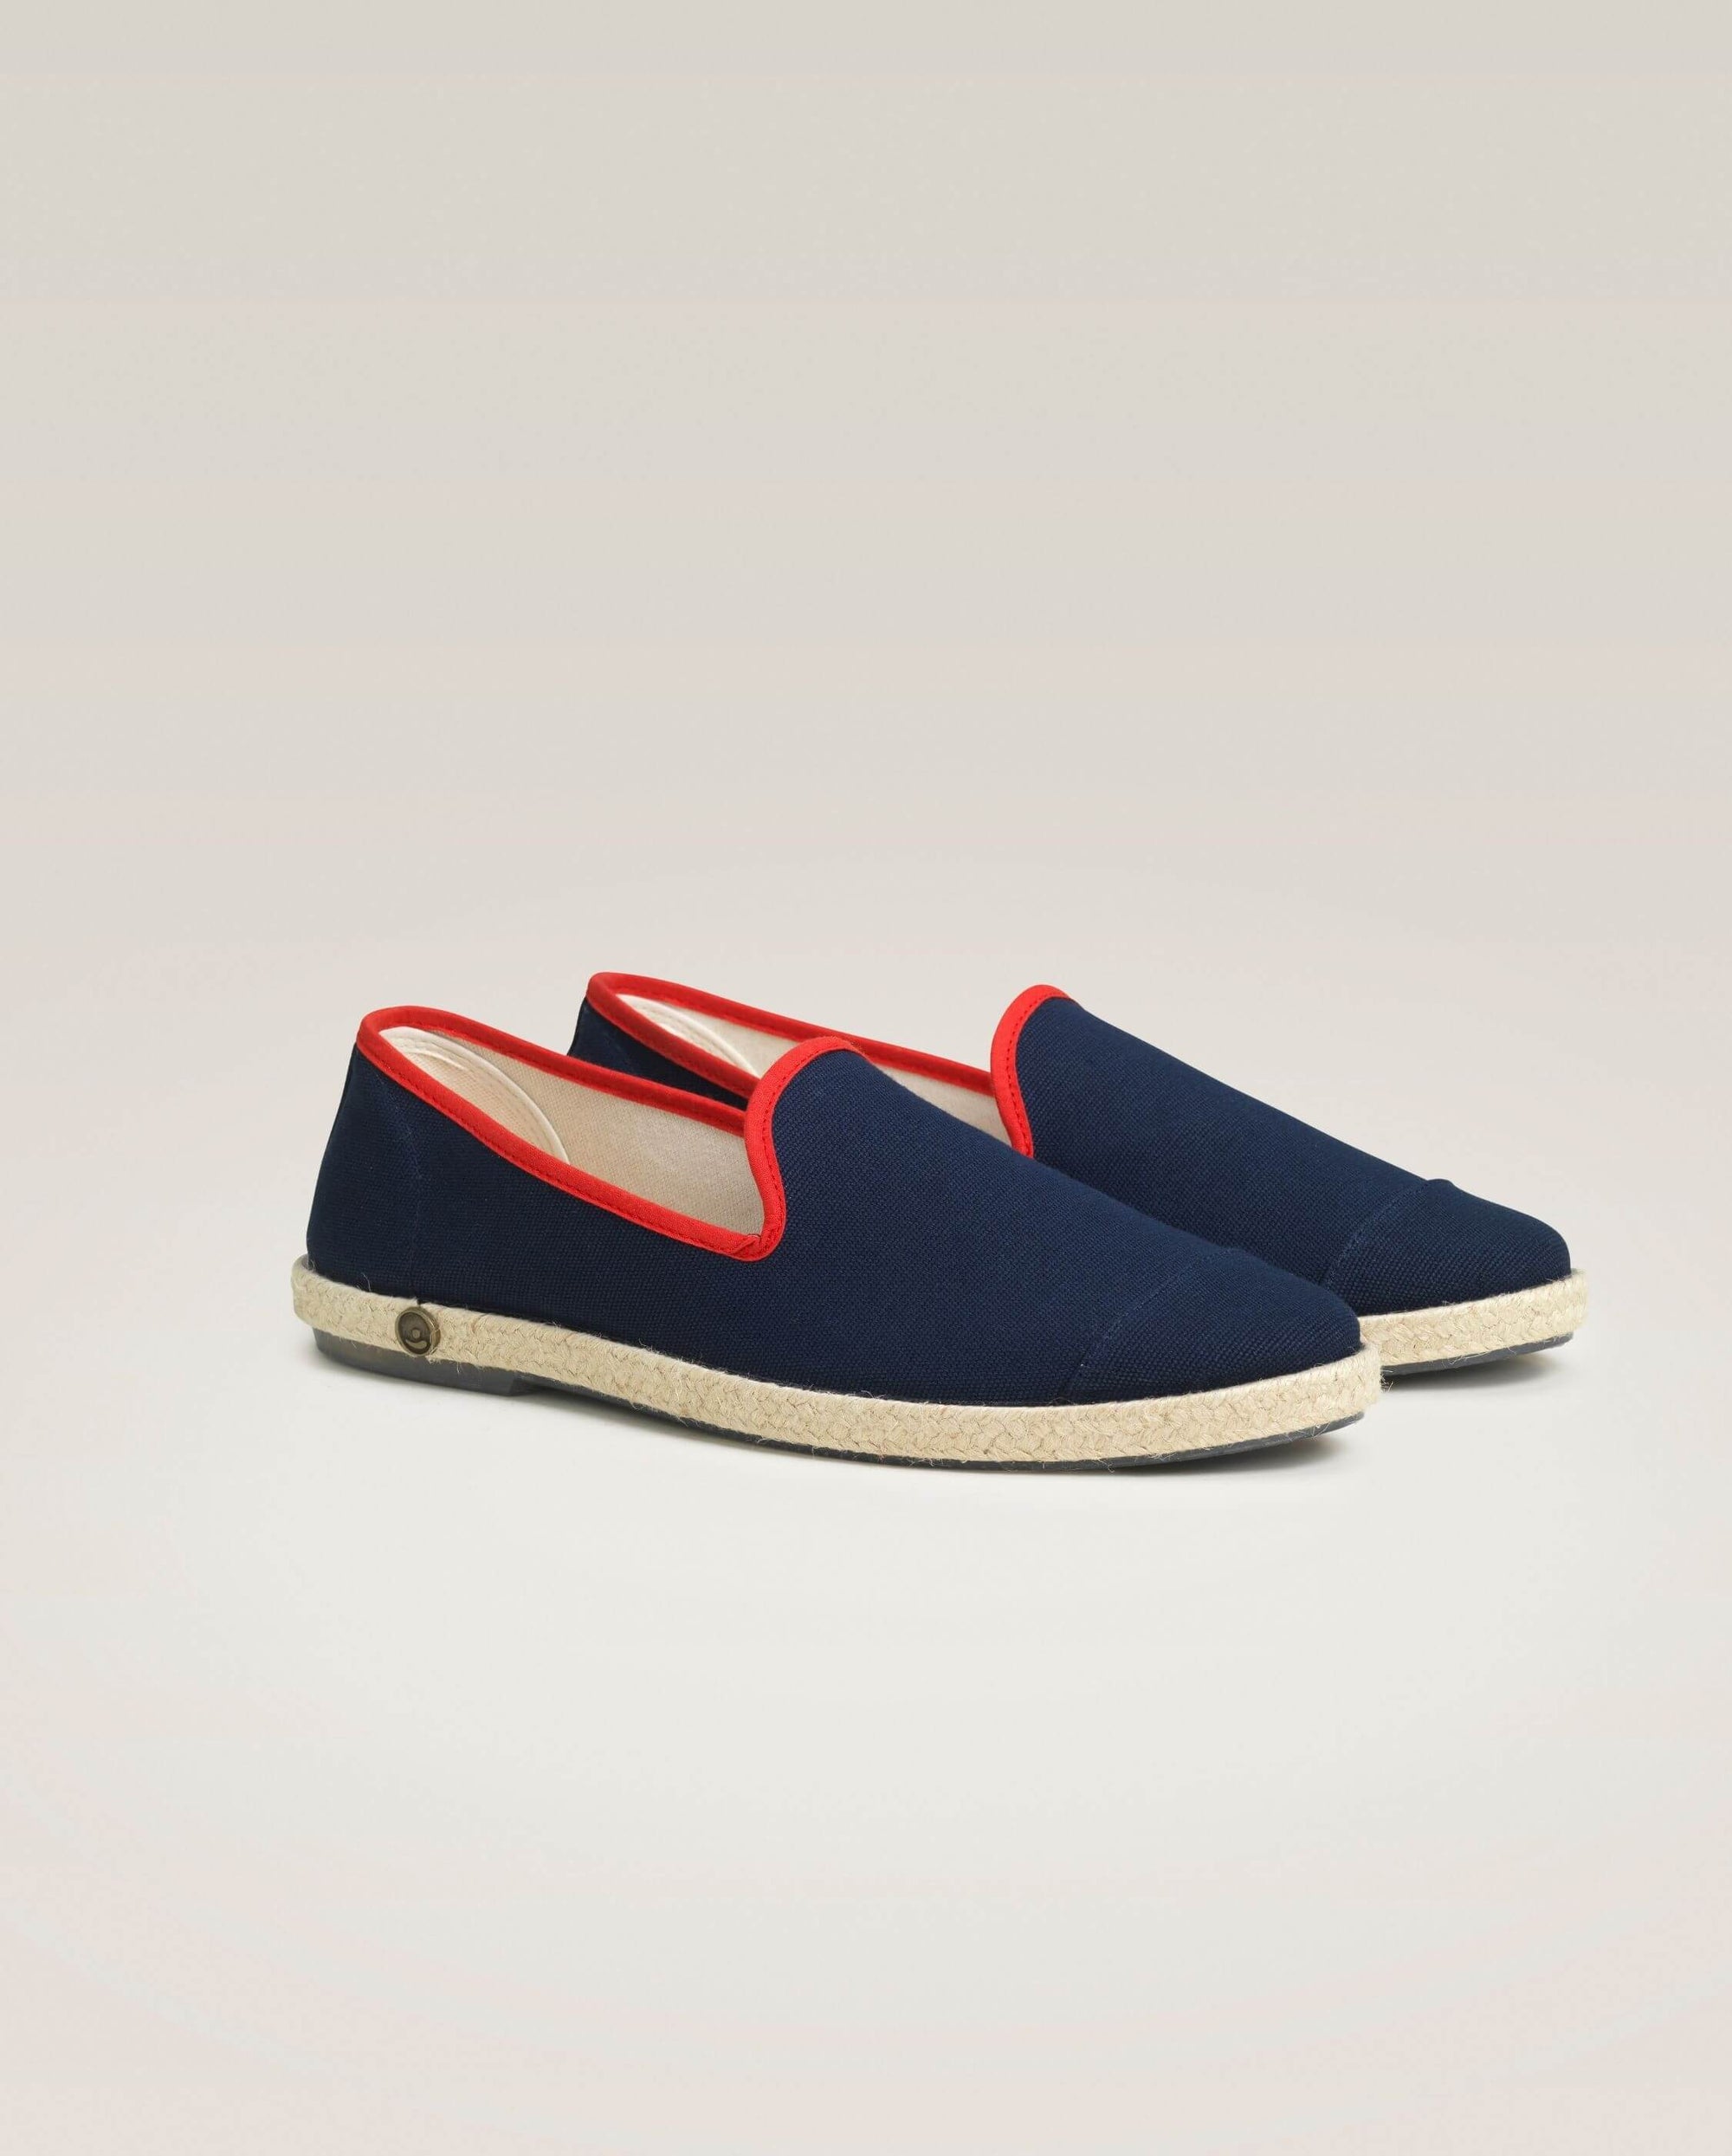 Men's recycled cotton espadrille, navy red